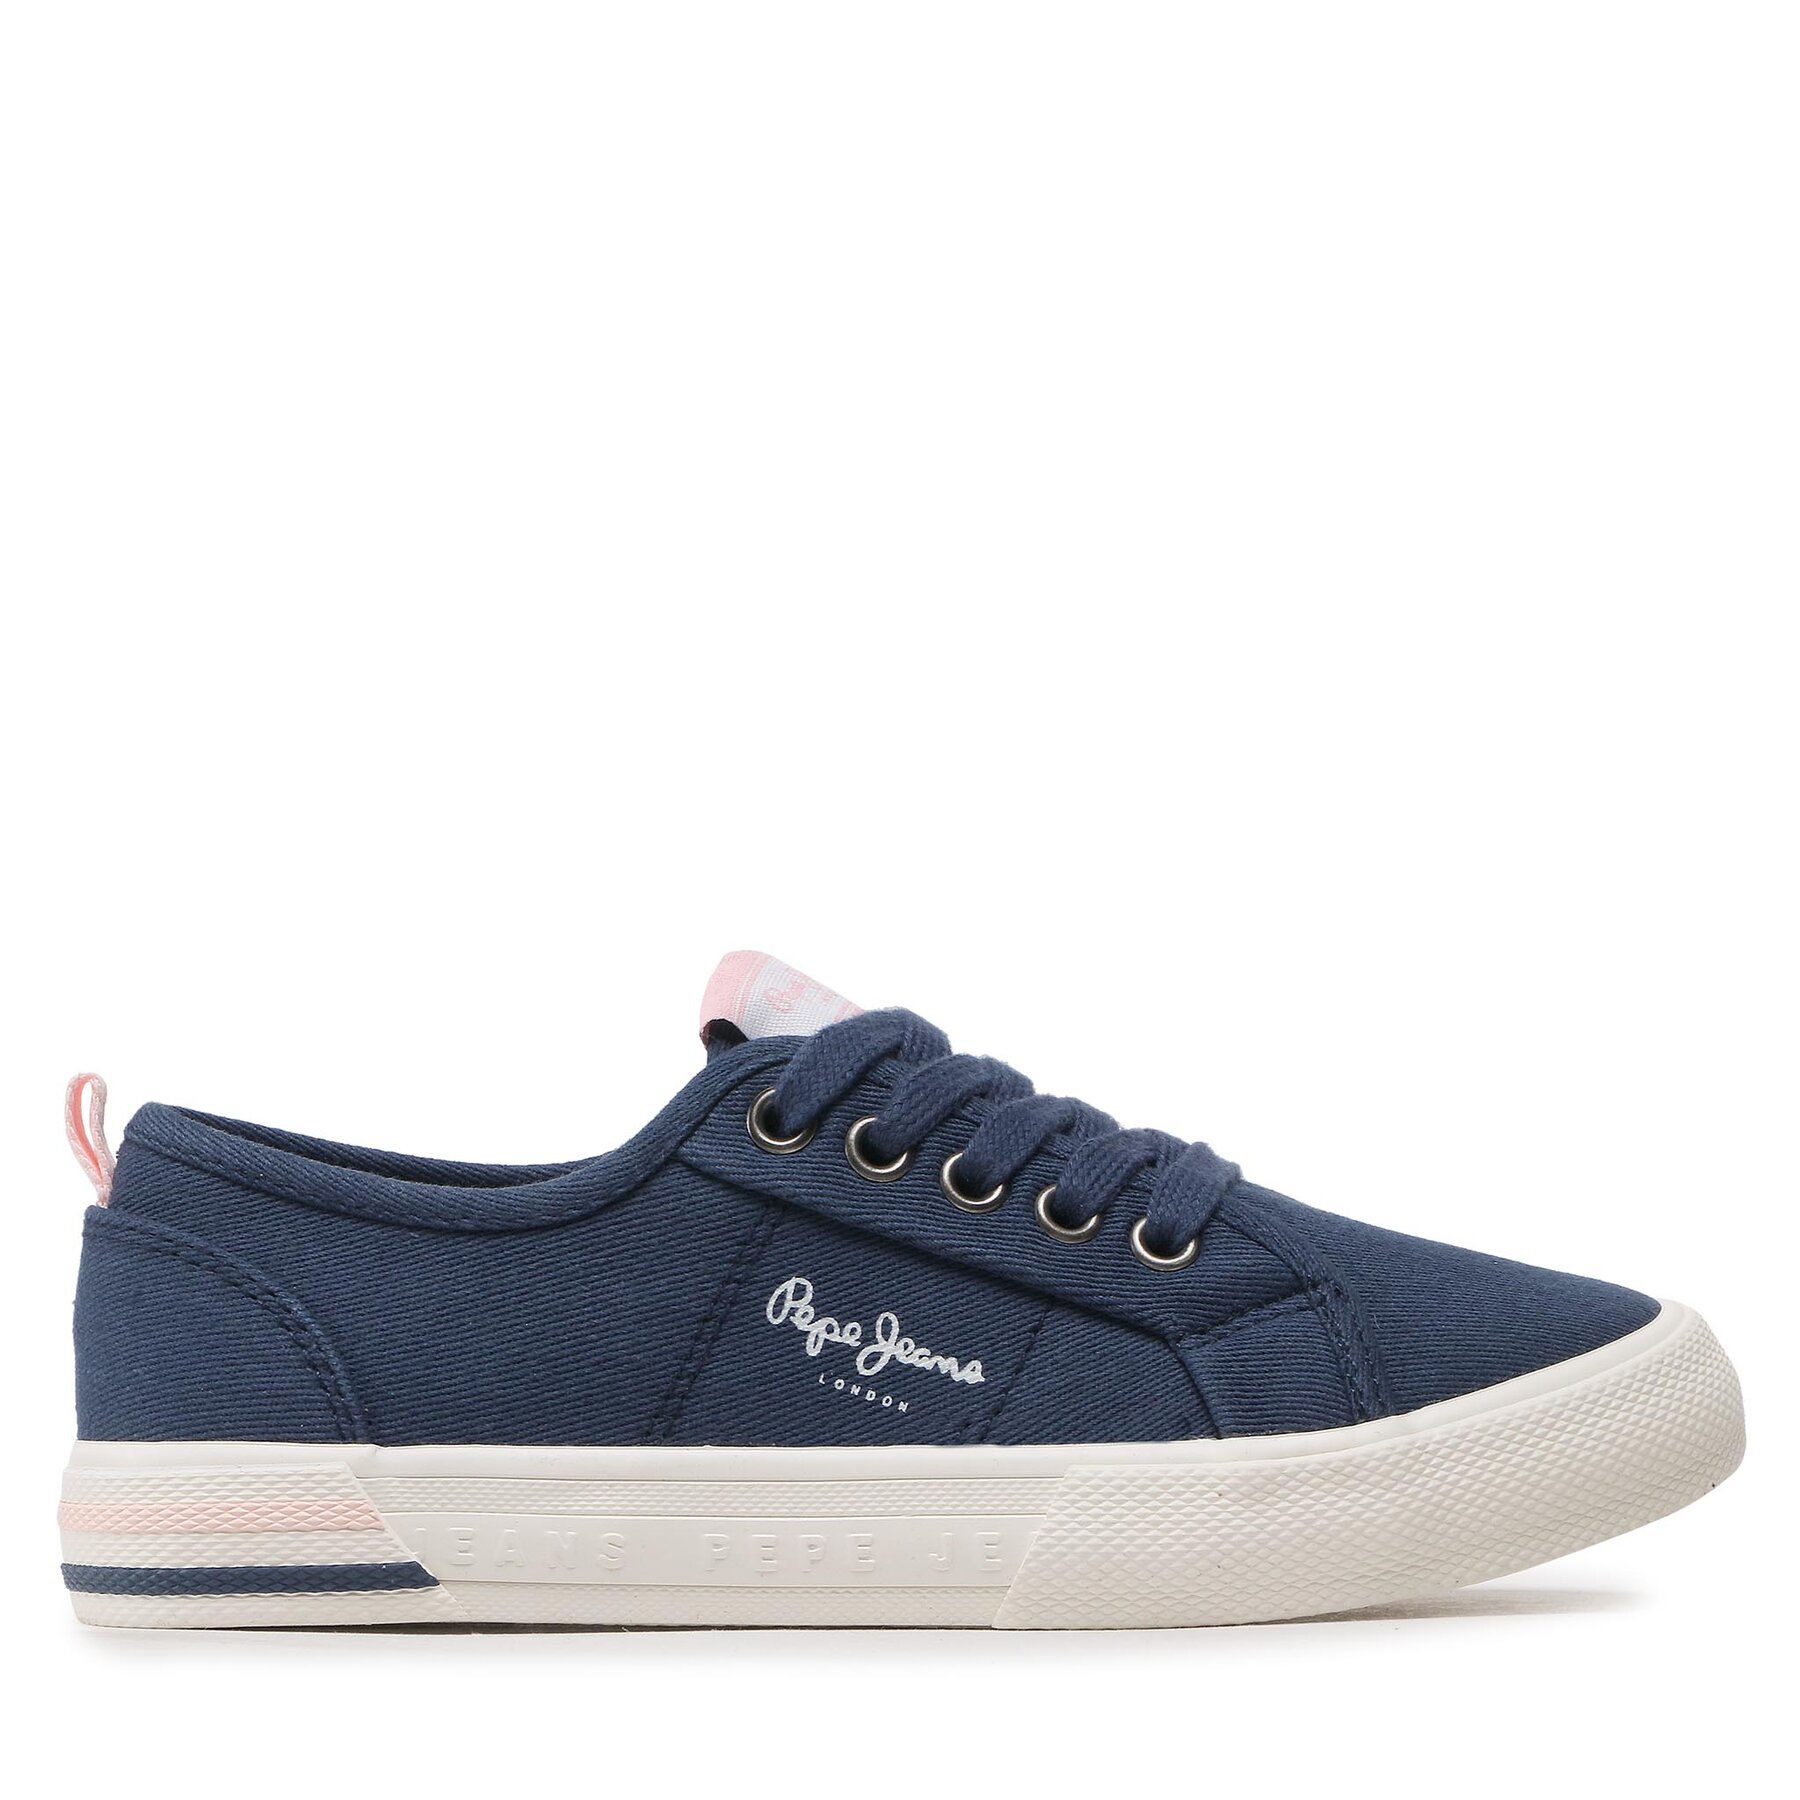 Sneakers aus Stoff Pepe Jeans Brady Basic G PGS30561 Navy 595 von Pepe Jeans